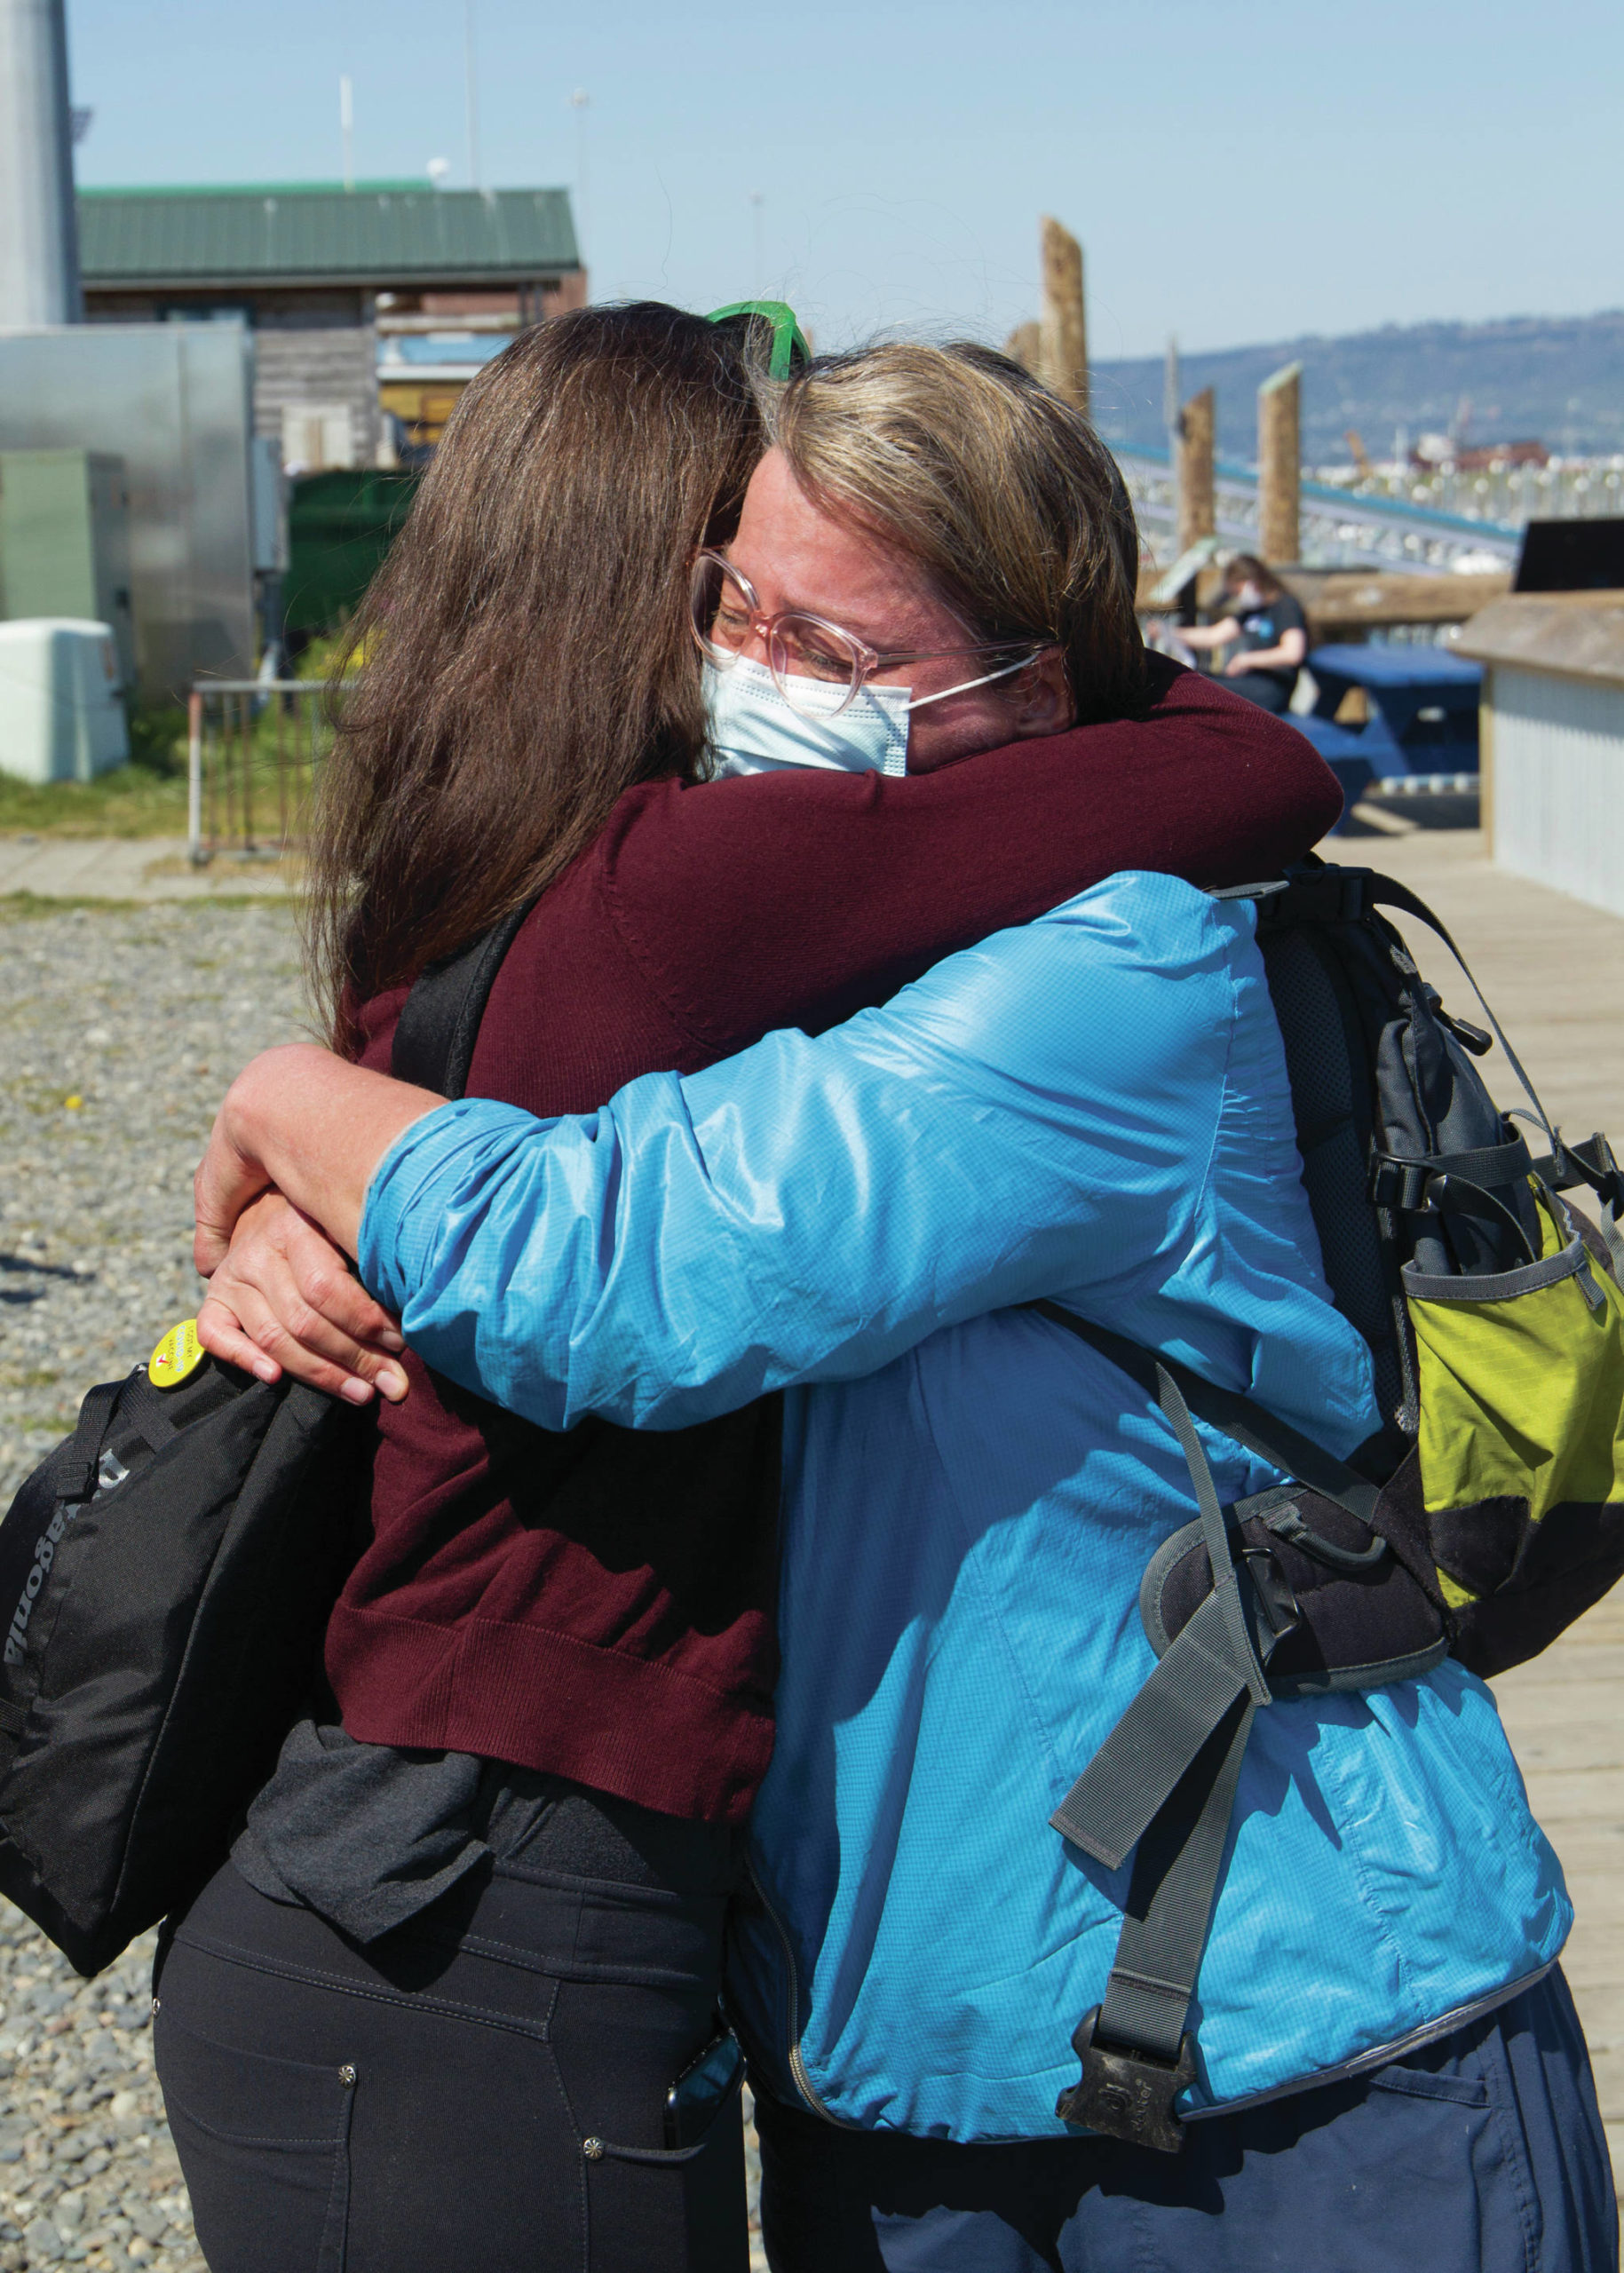 Alaska Chief Medical Officer Anne Zink, M.D., left, hugs Amy Russell, right, on Thursday, May 27, 2021, at a pop-up vaccination clinic on the Homer Spit in Homer, Alaska. (Photo by Sarah Knapp/Homer News)